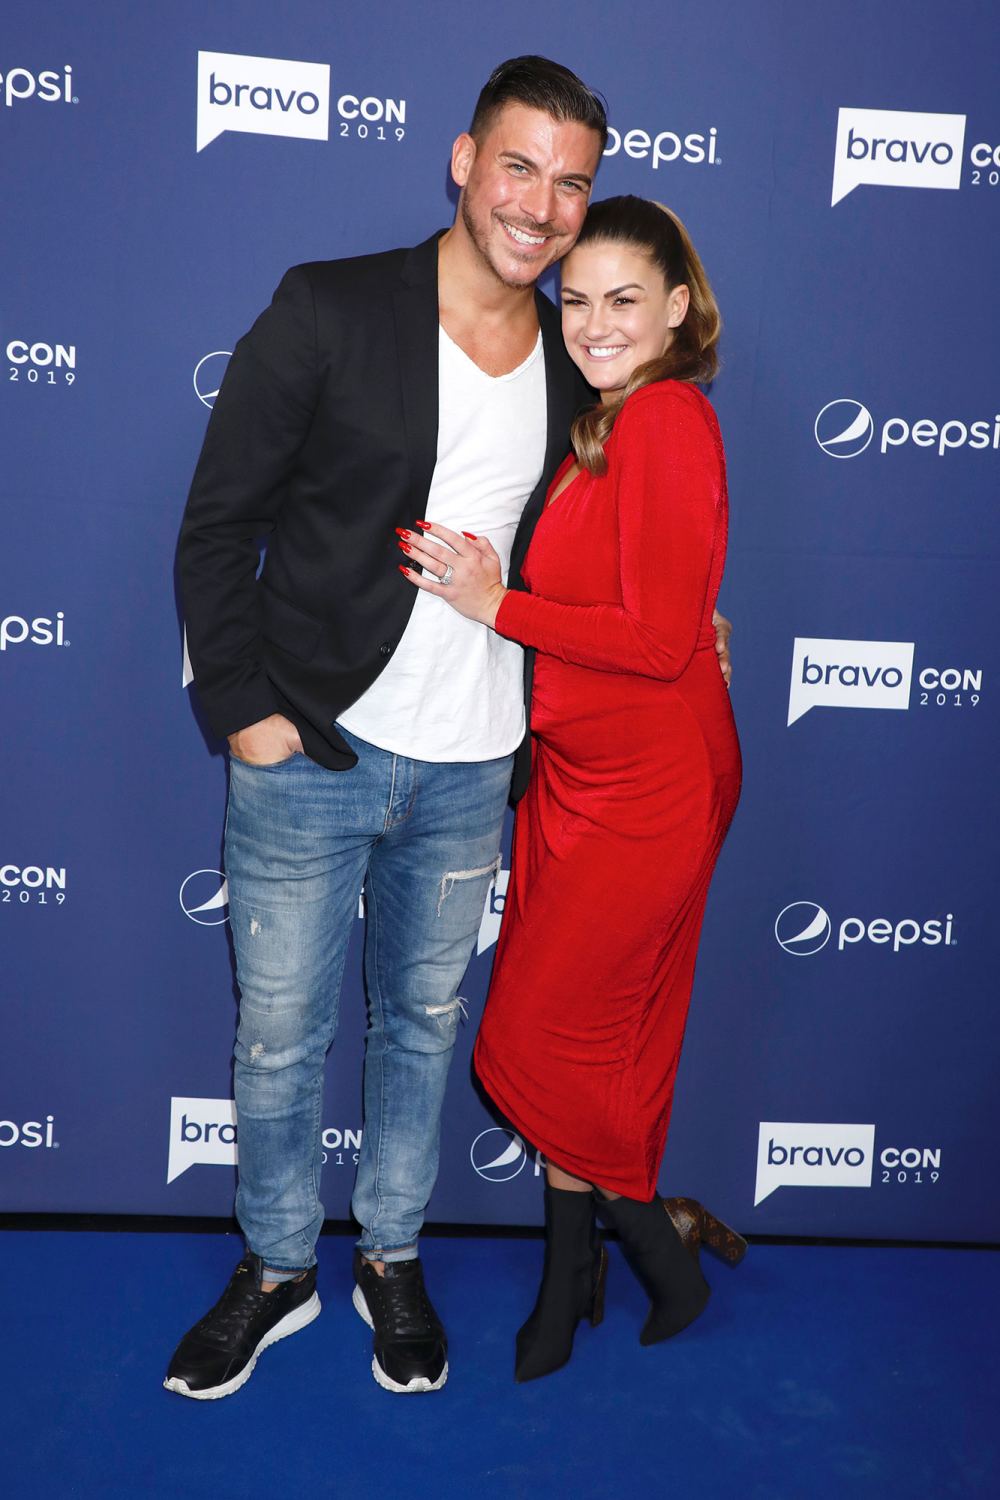 Jax Taylor Hinted That He and Pregnant Brittany Cartwright Are Expecting a Baby Girl